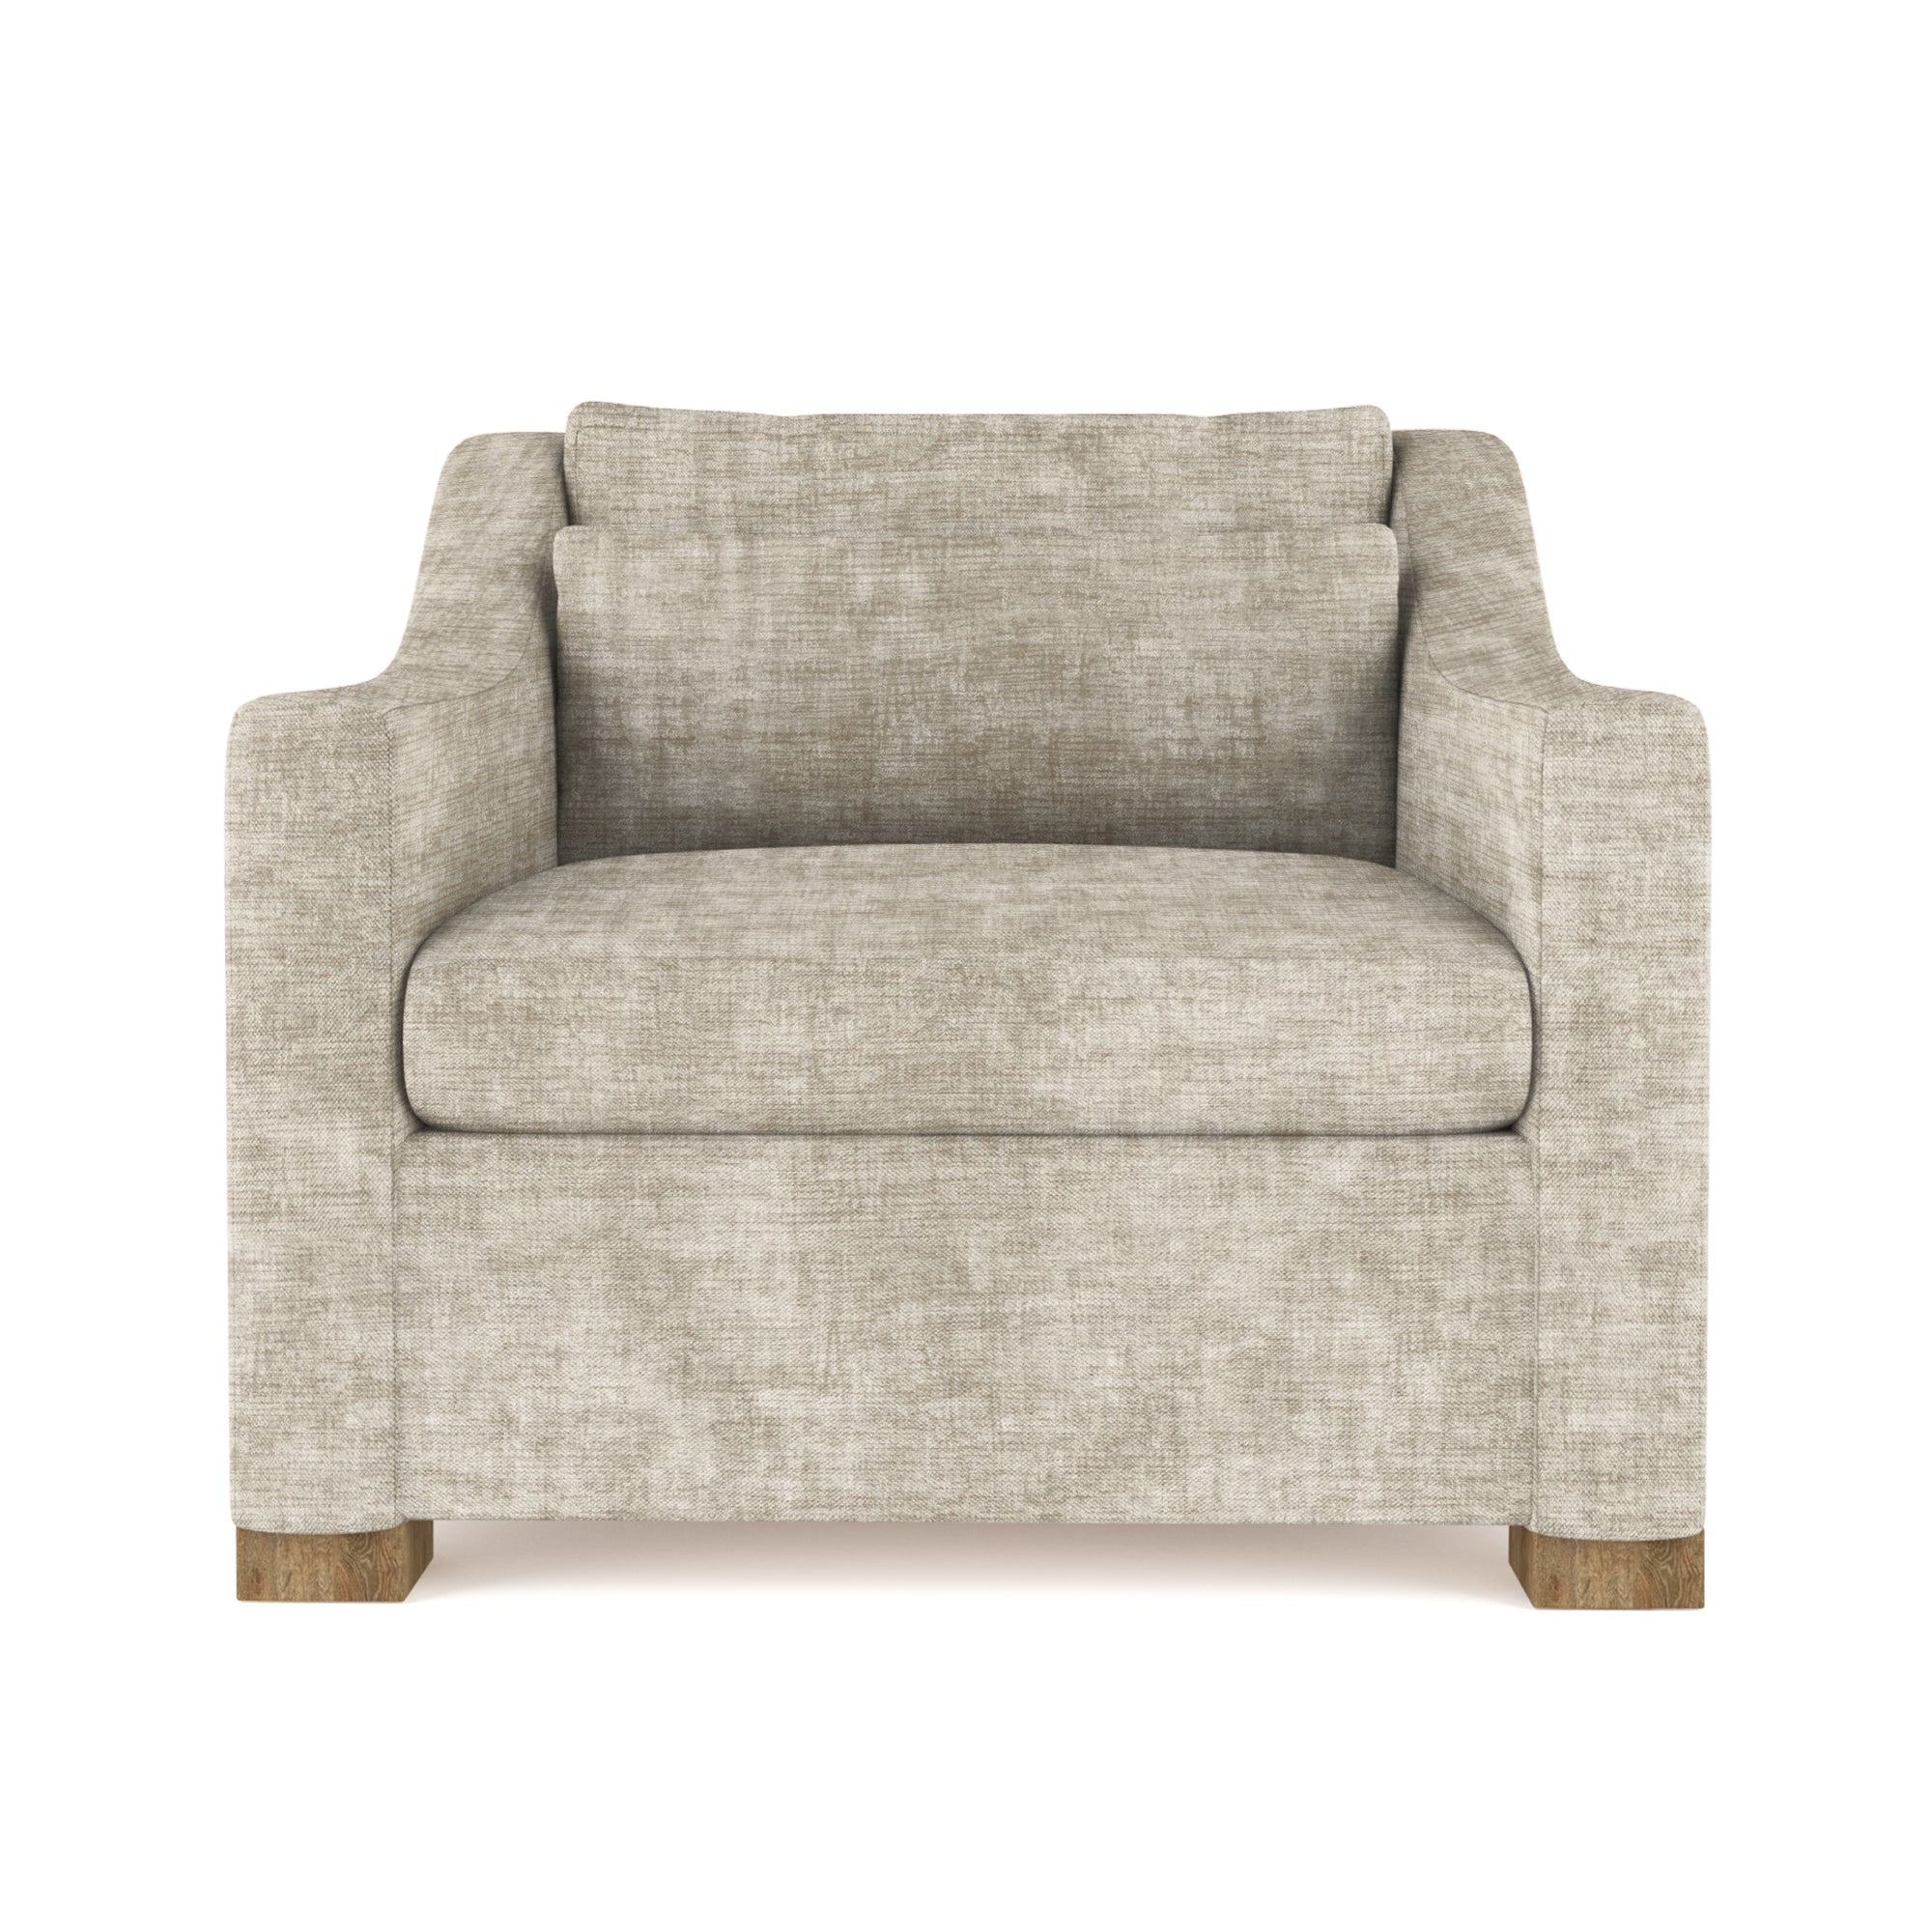 Crosby Chair - Oyster Crushed Velvet